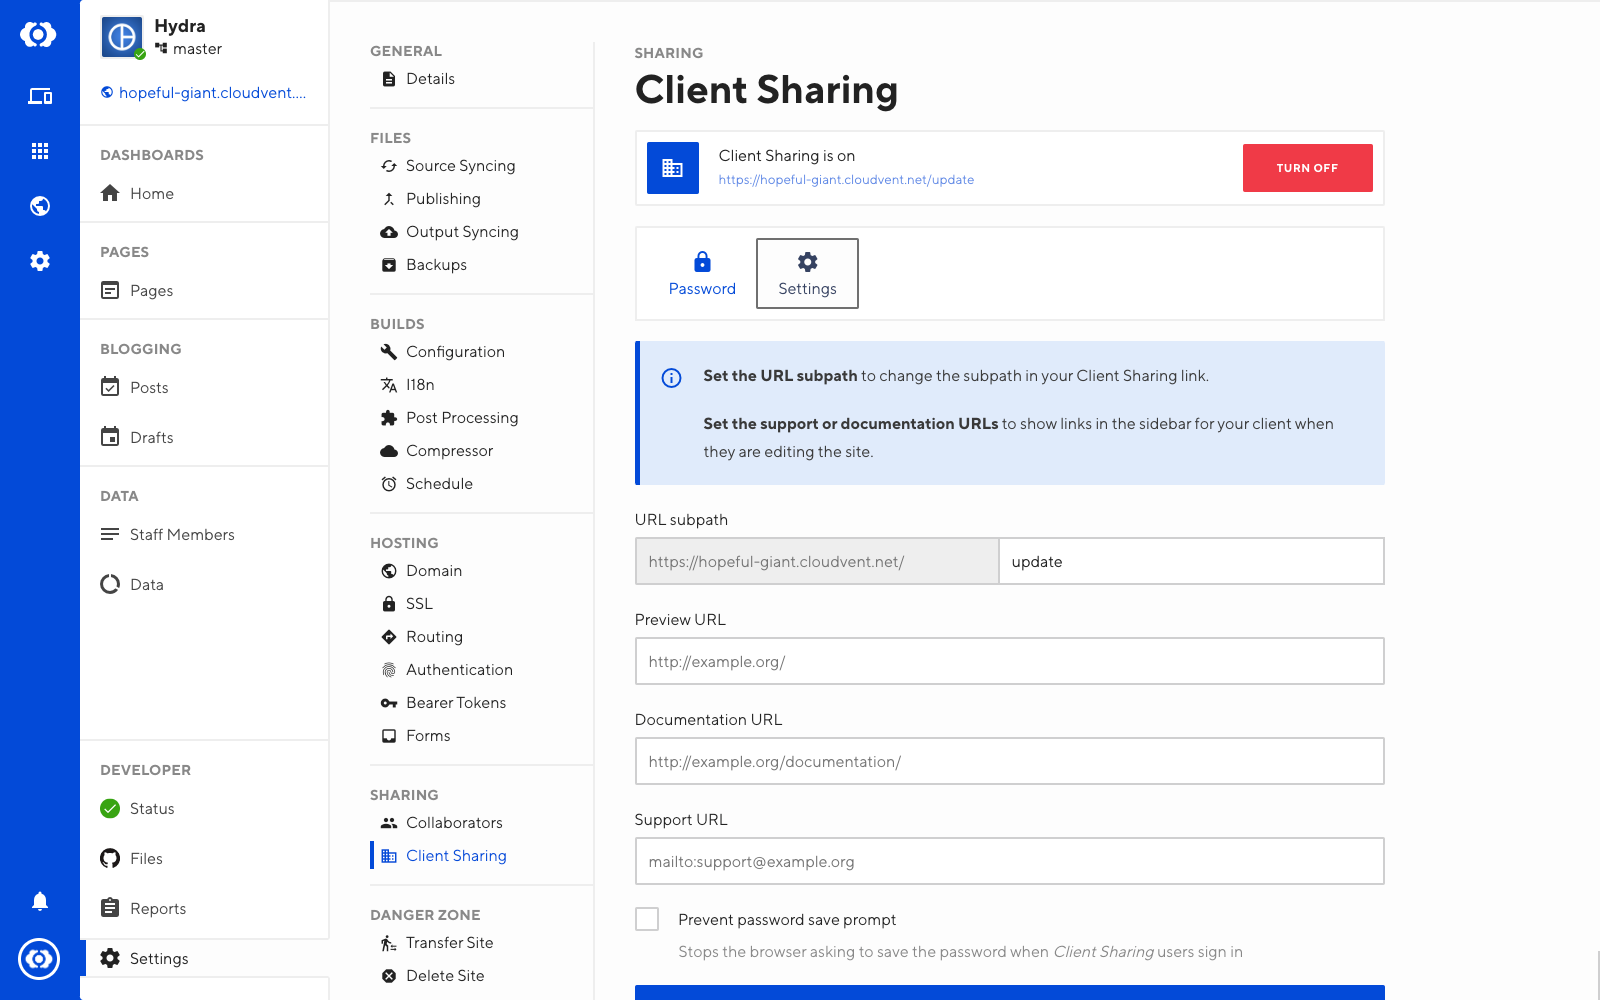 Screenshot of Client Sharing settings interface